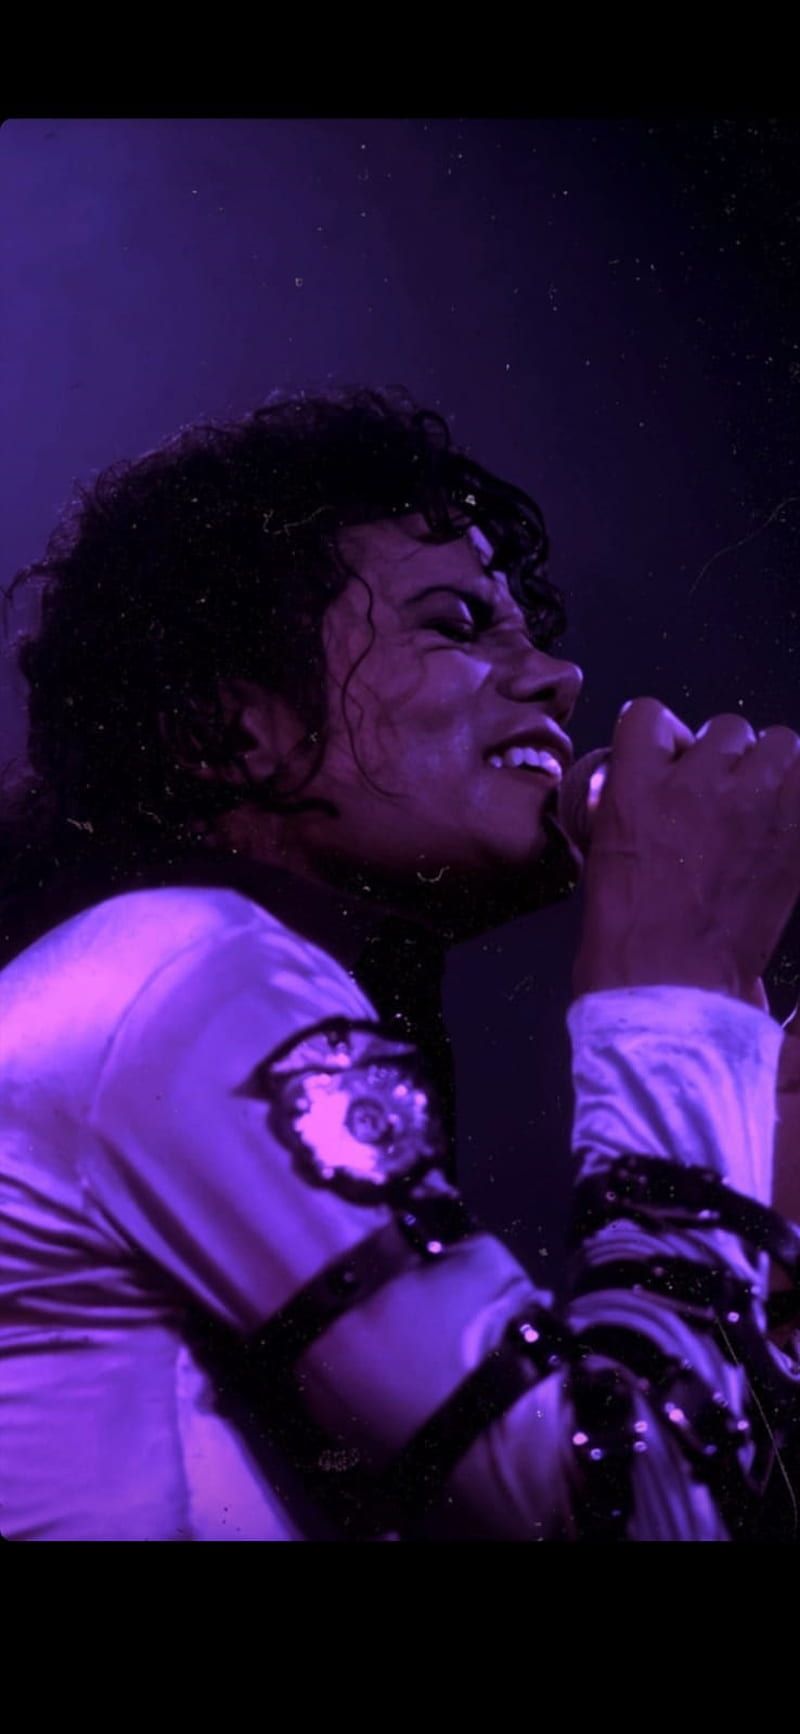 A man singing into the microphone - Michael Jackson